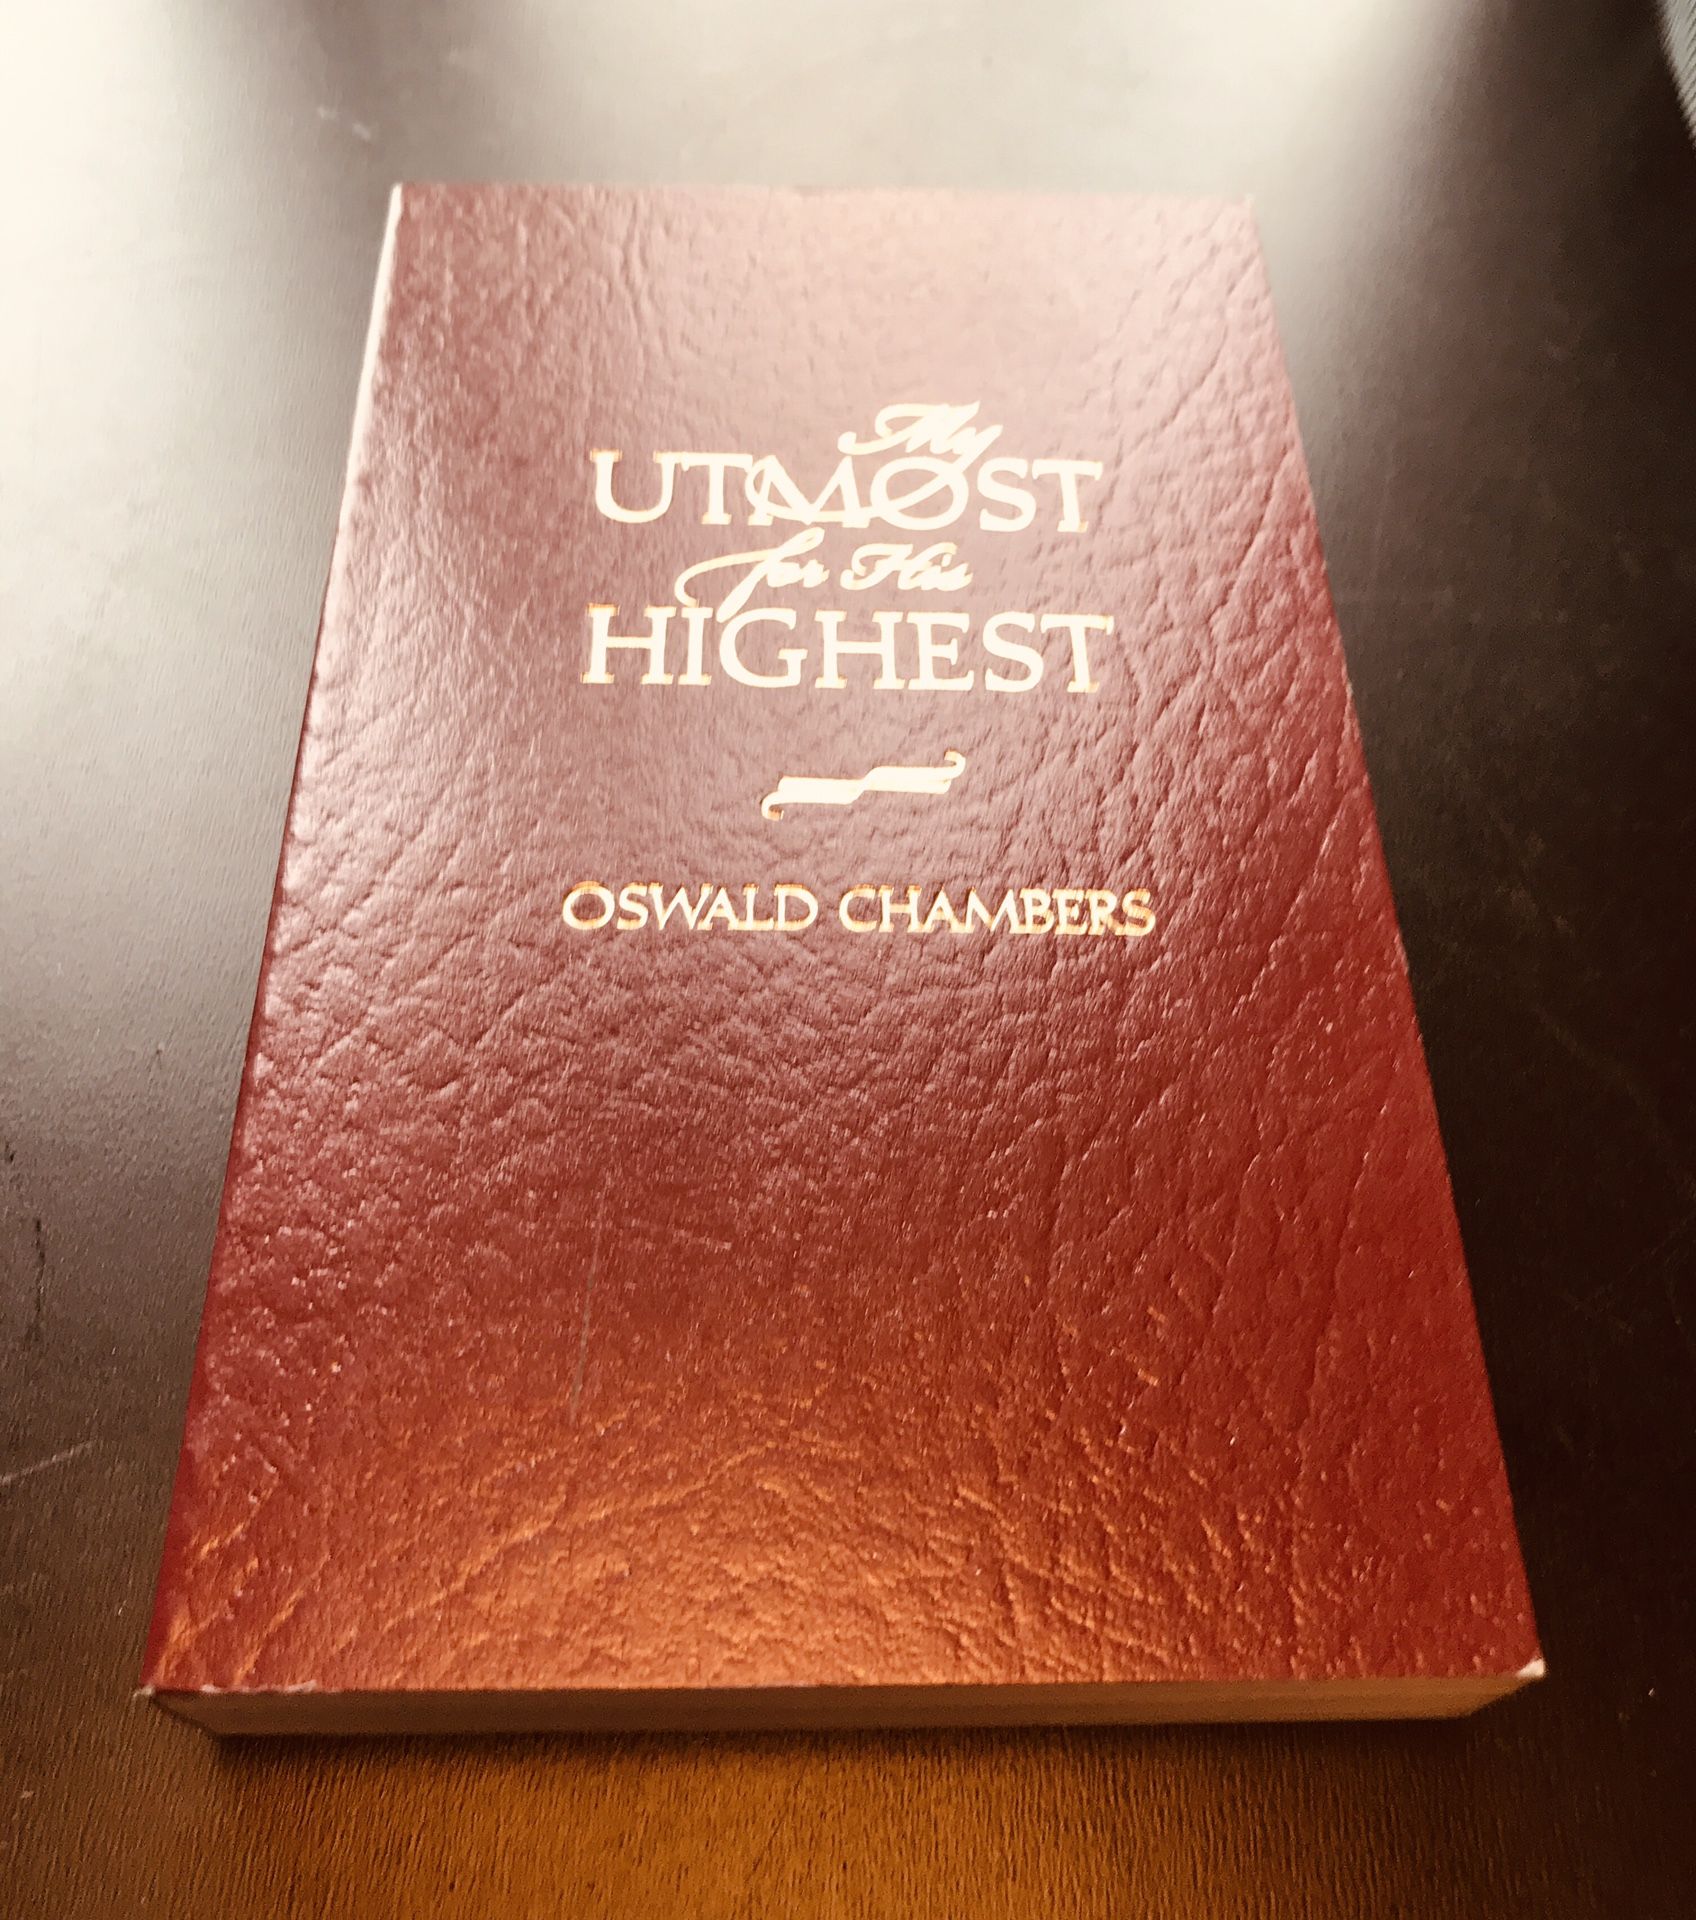 My Utmost for His Highest (Classic Edition) by Oswald Chambers